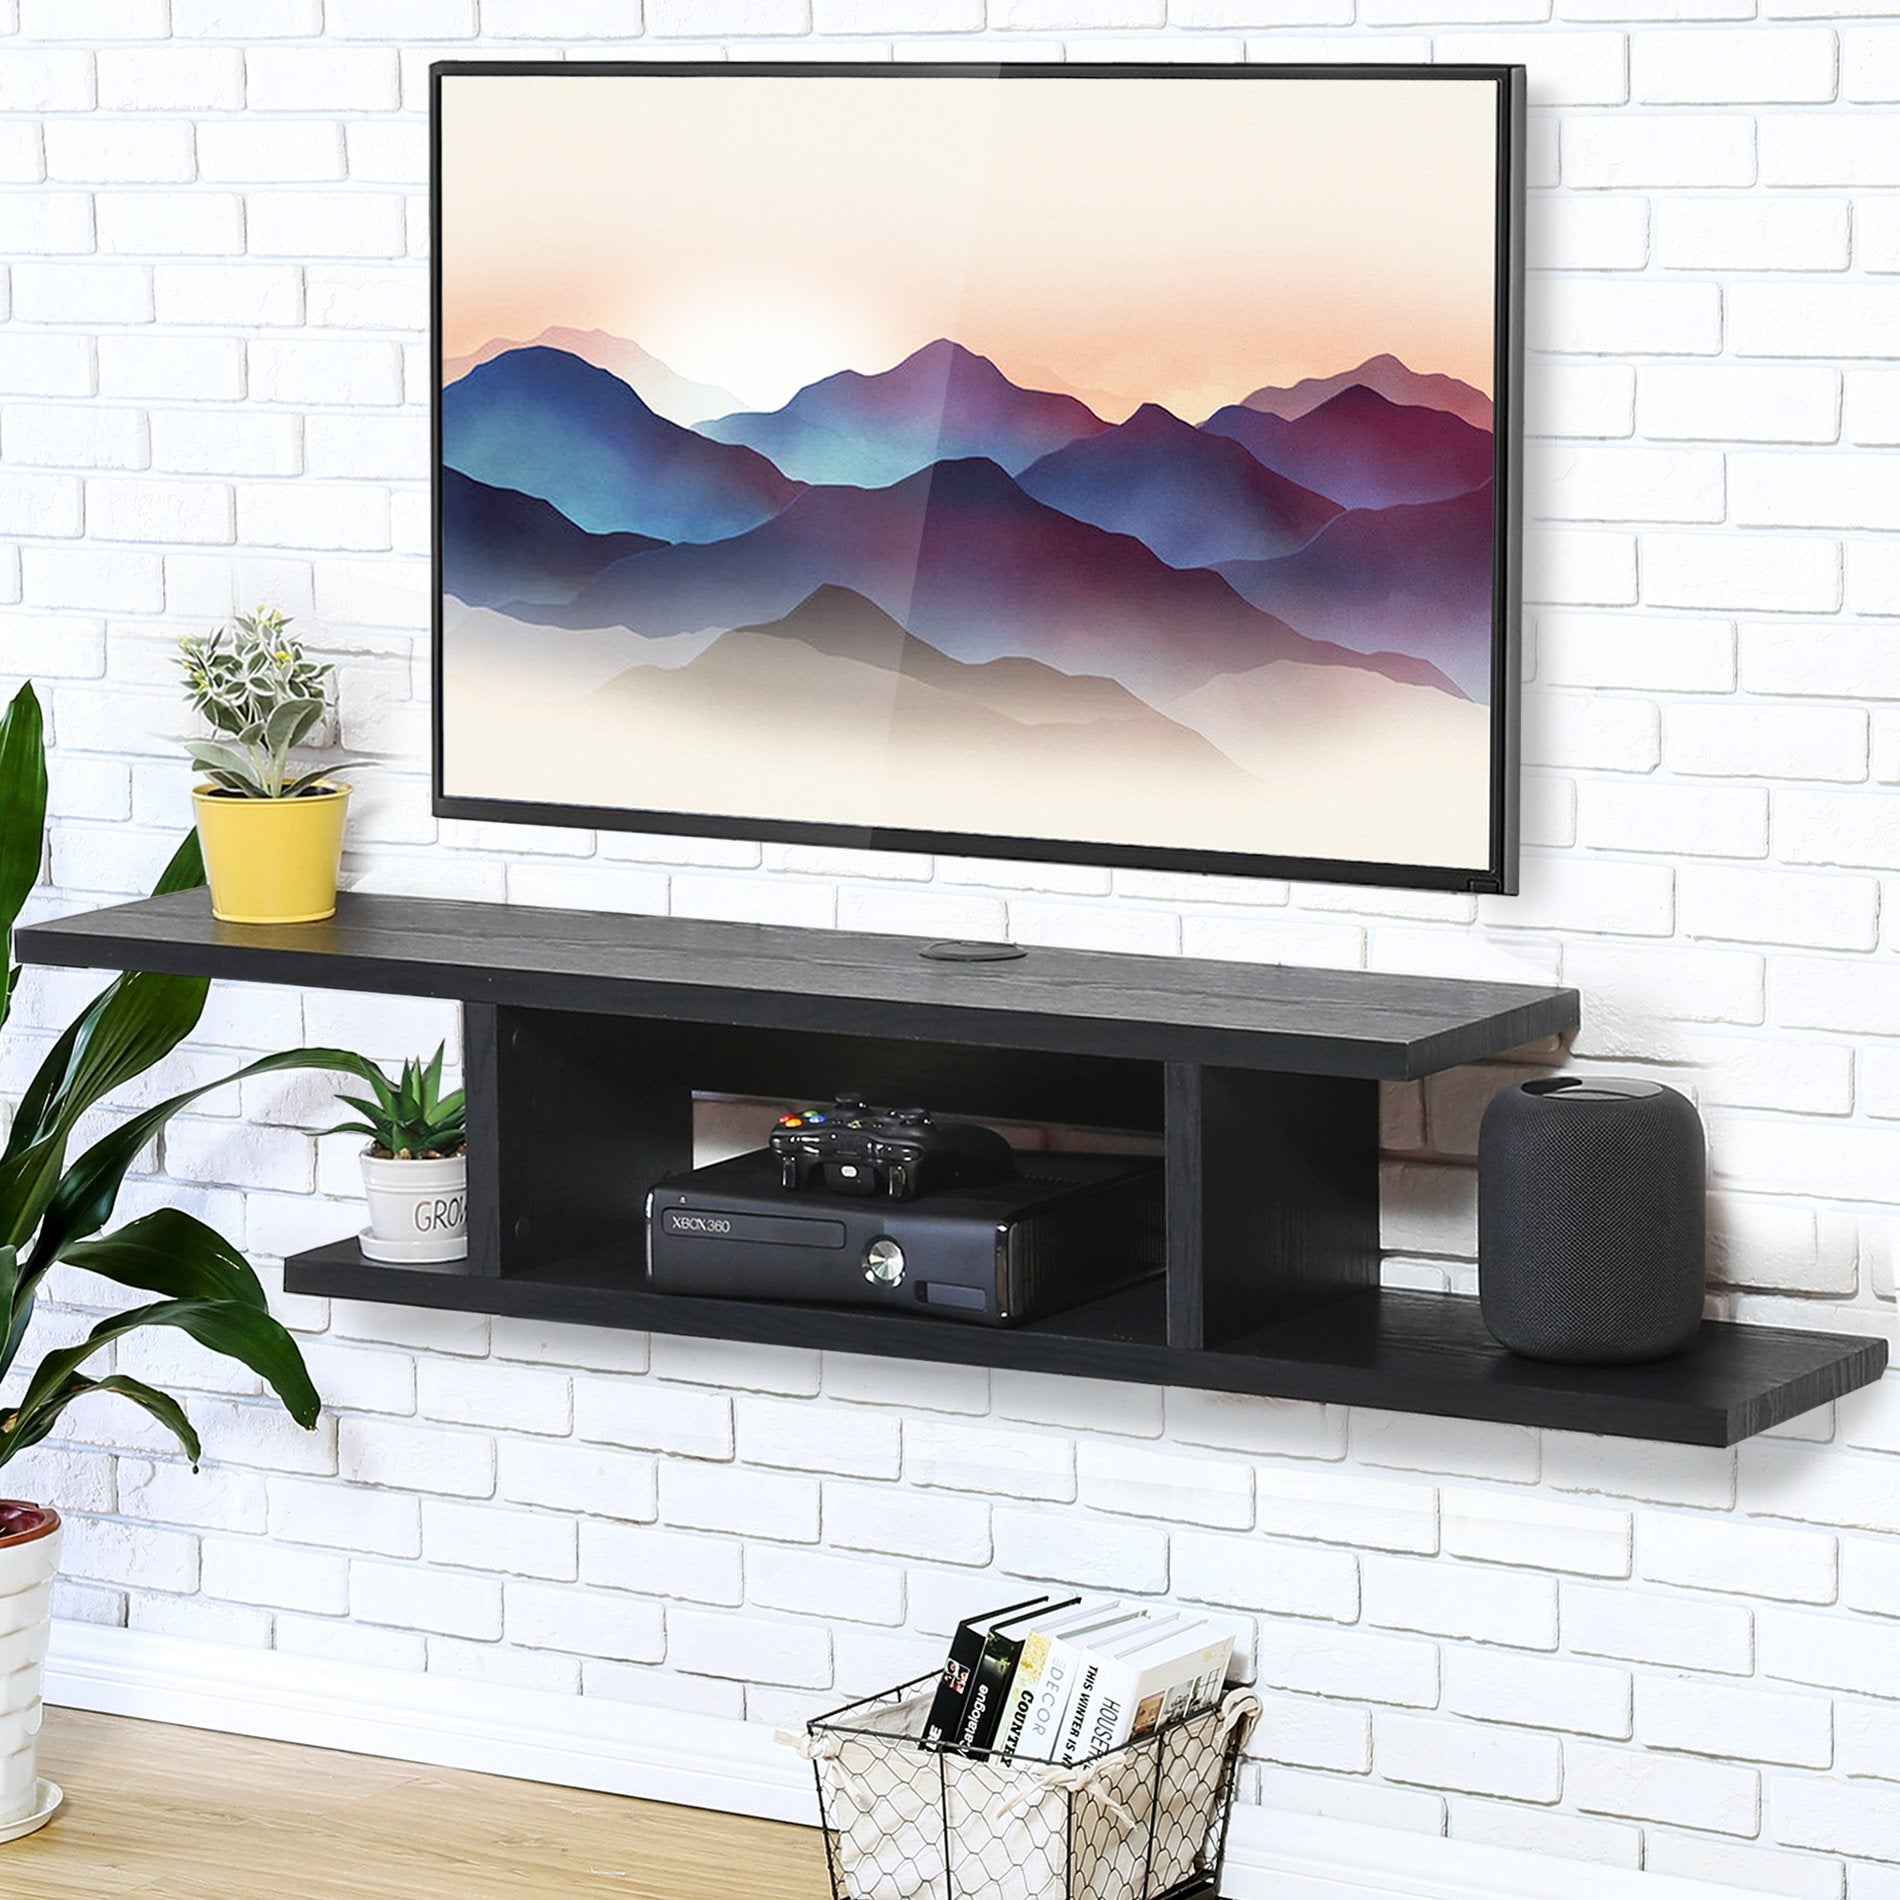 Floating TV Stand Entertainment Center 43 Inch - FITUEYES-CA